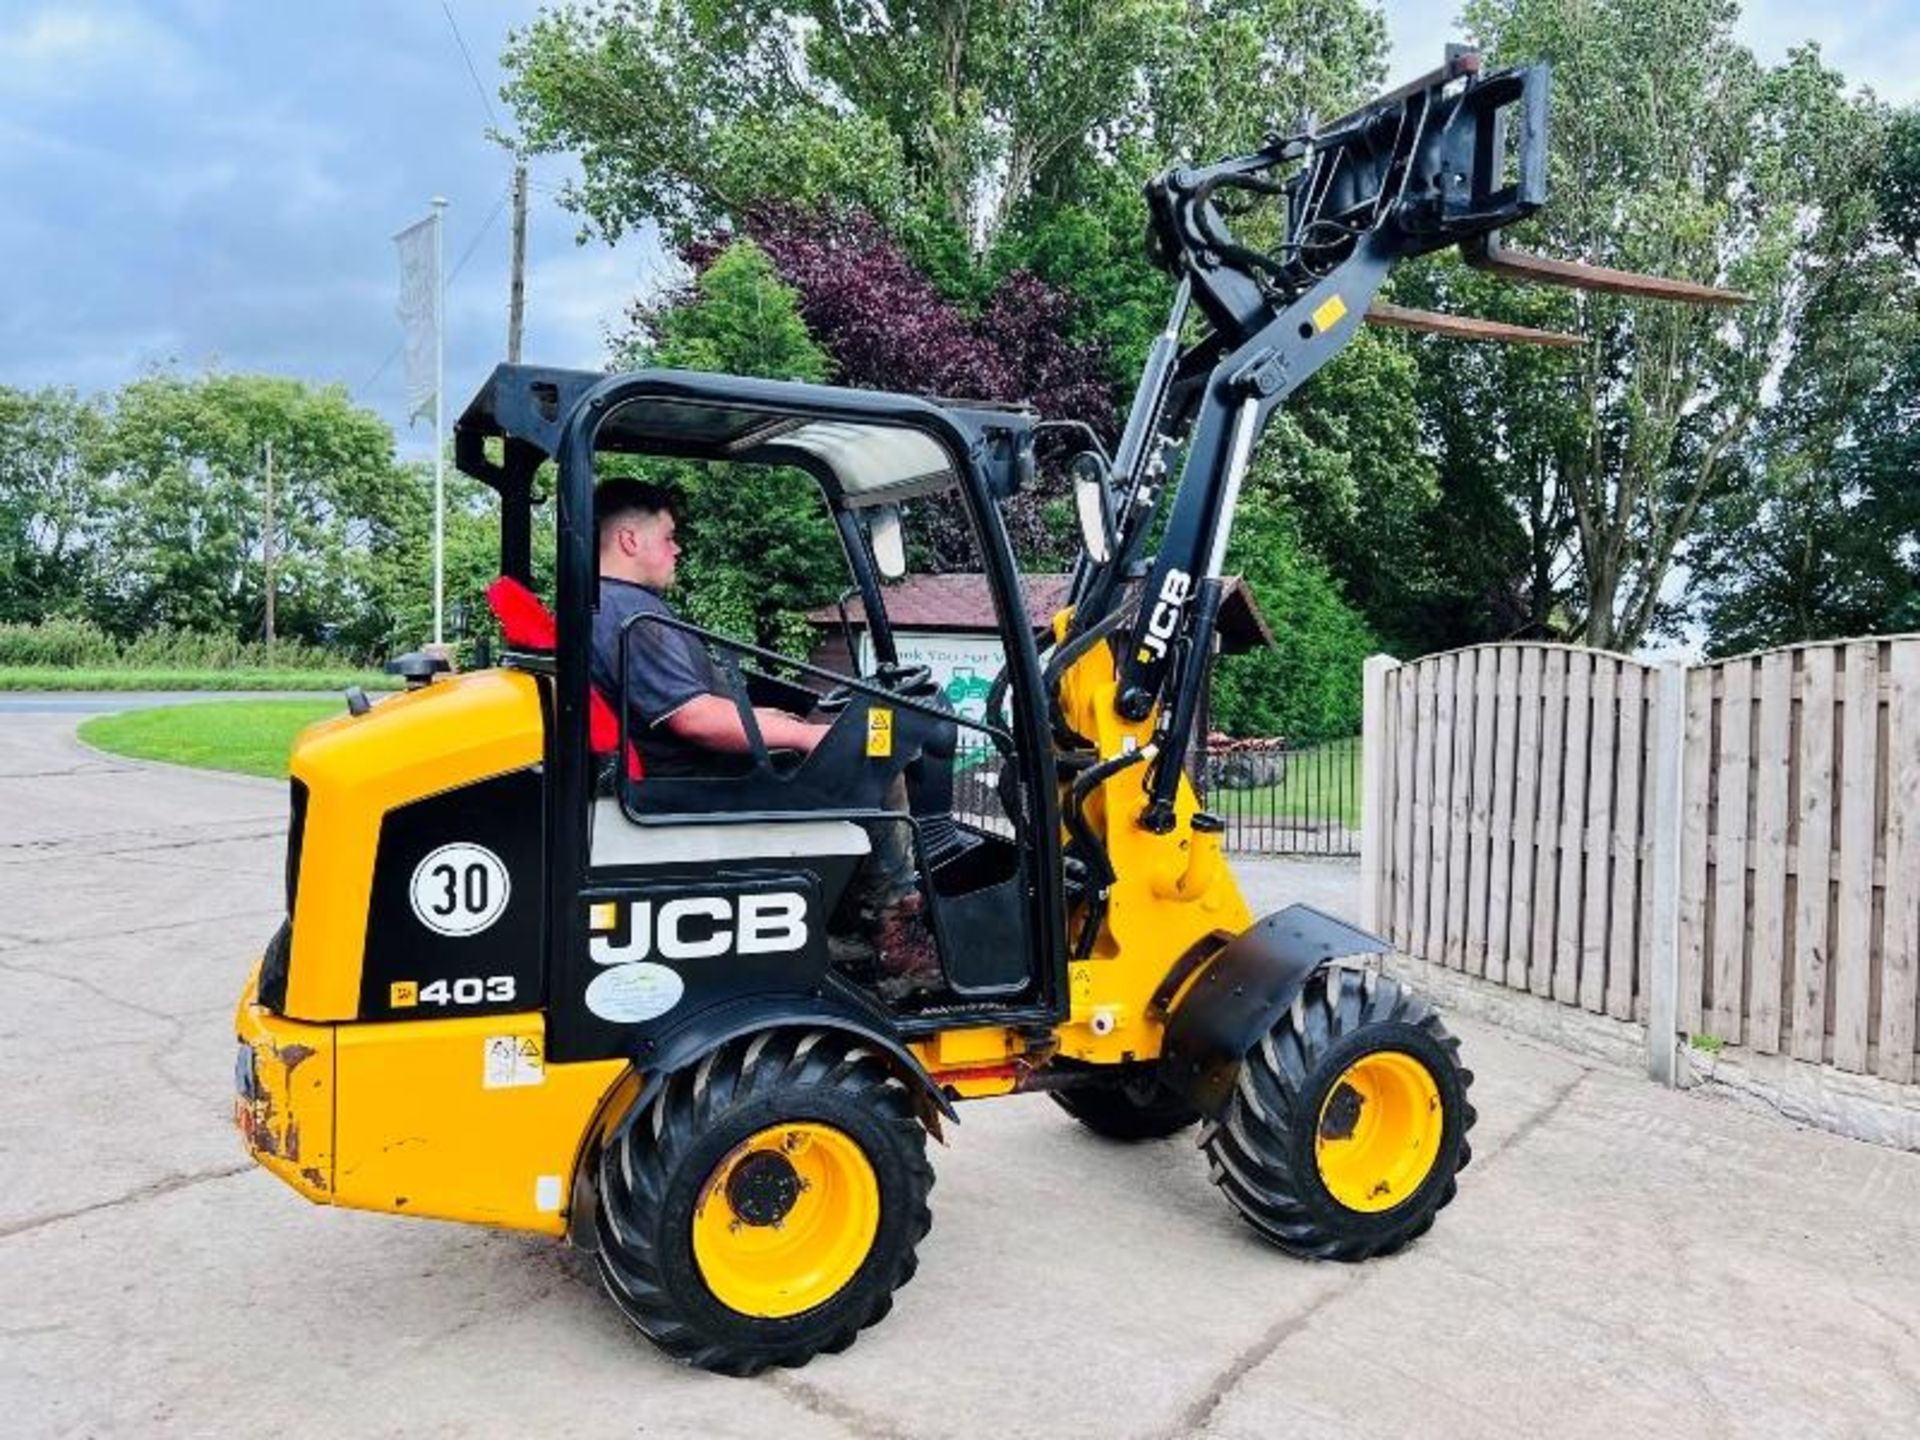 JCB 403 4WD LOADING SHOVEL *YEAR 2018 ,ONLY 2818 HOURS* C/W PALLET TINES - Image 10 of 15